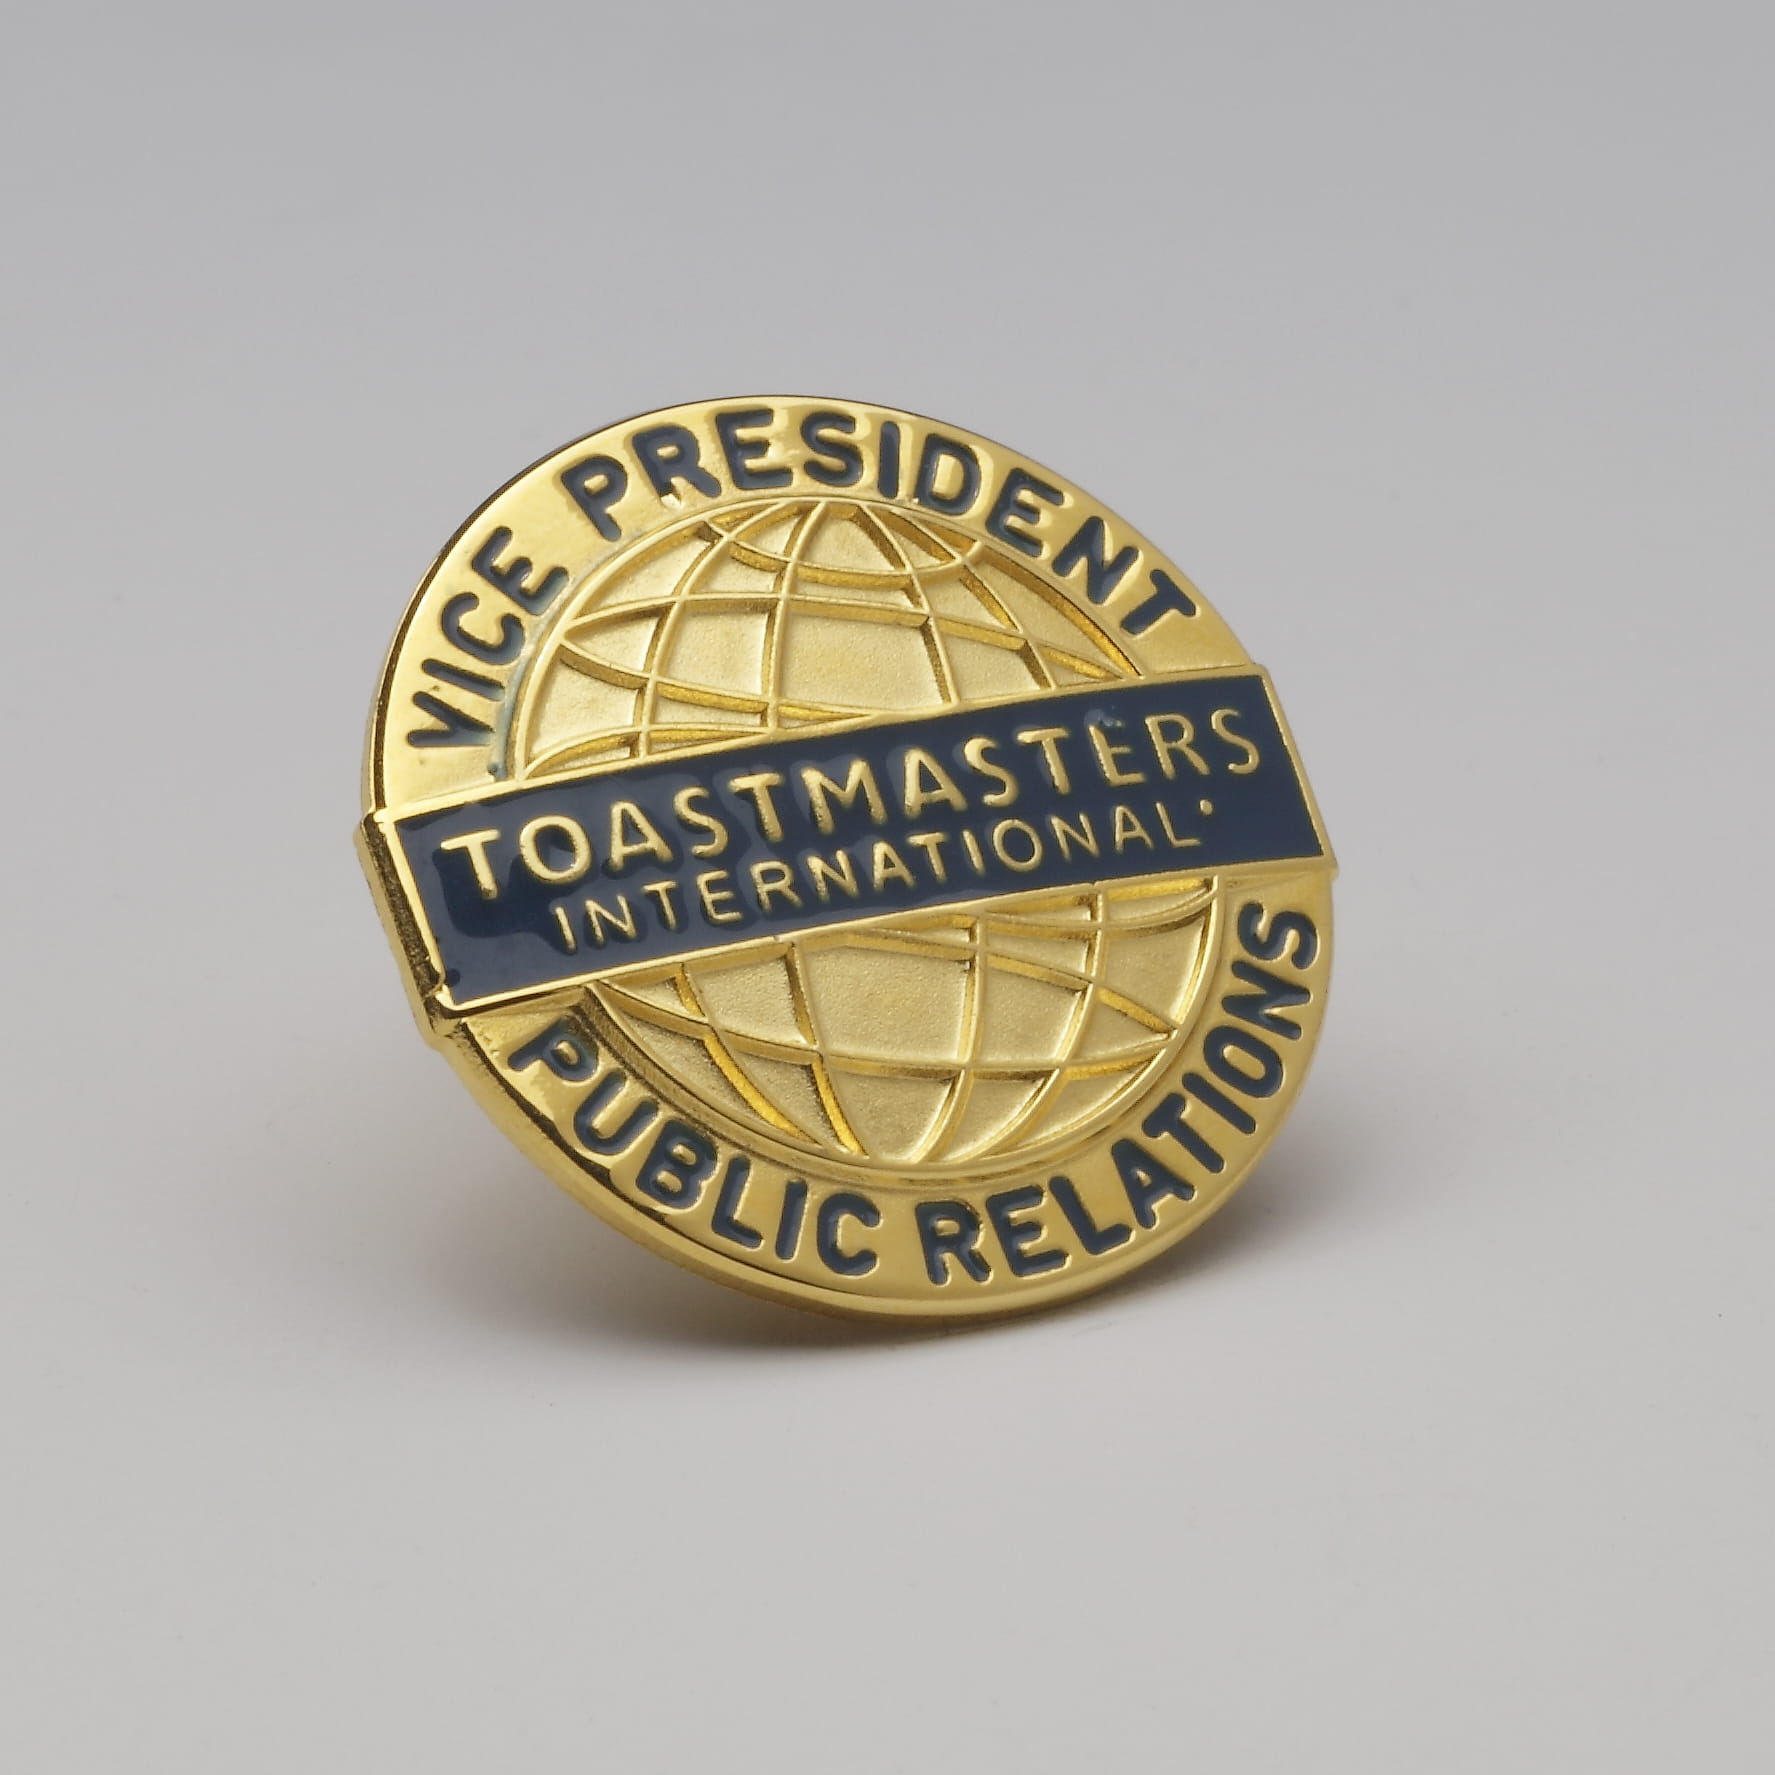 Vice President Public Relations Pin